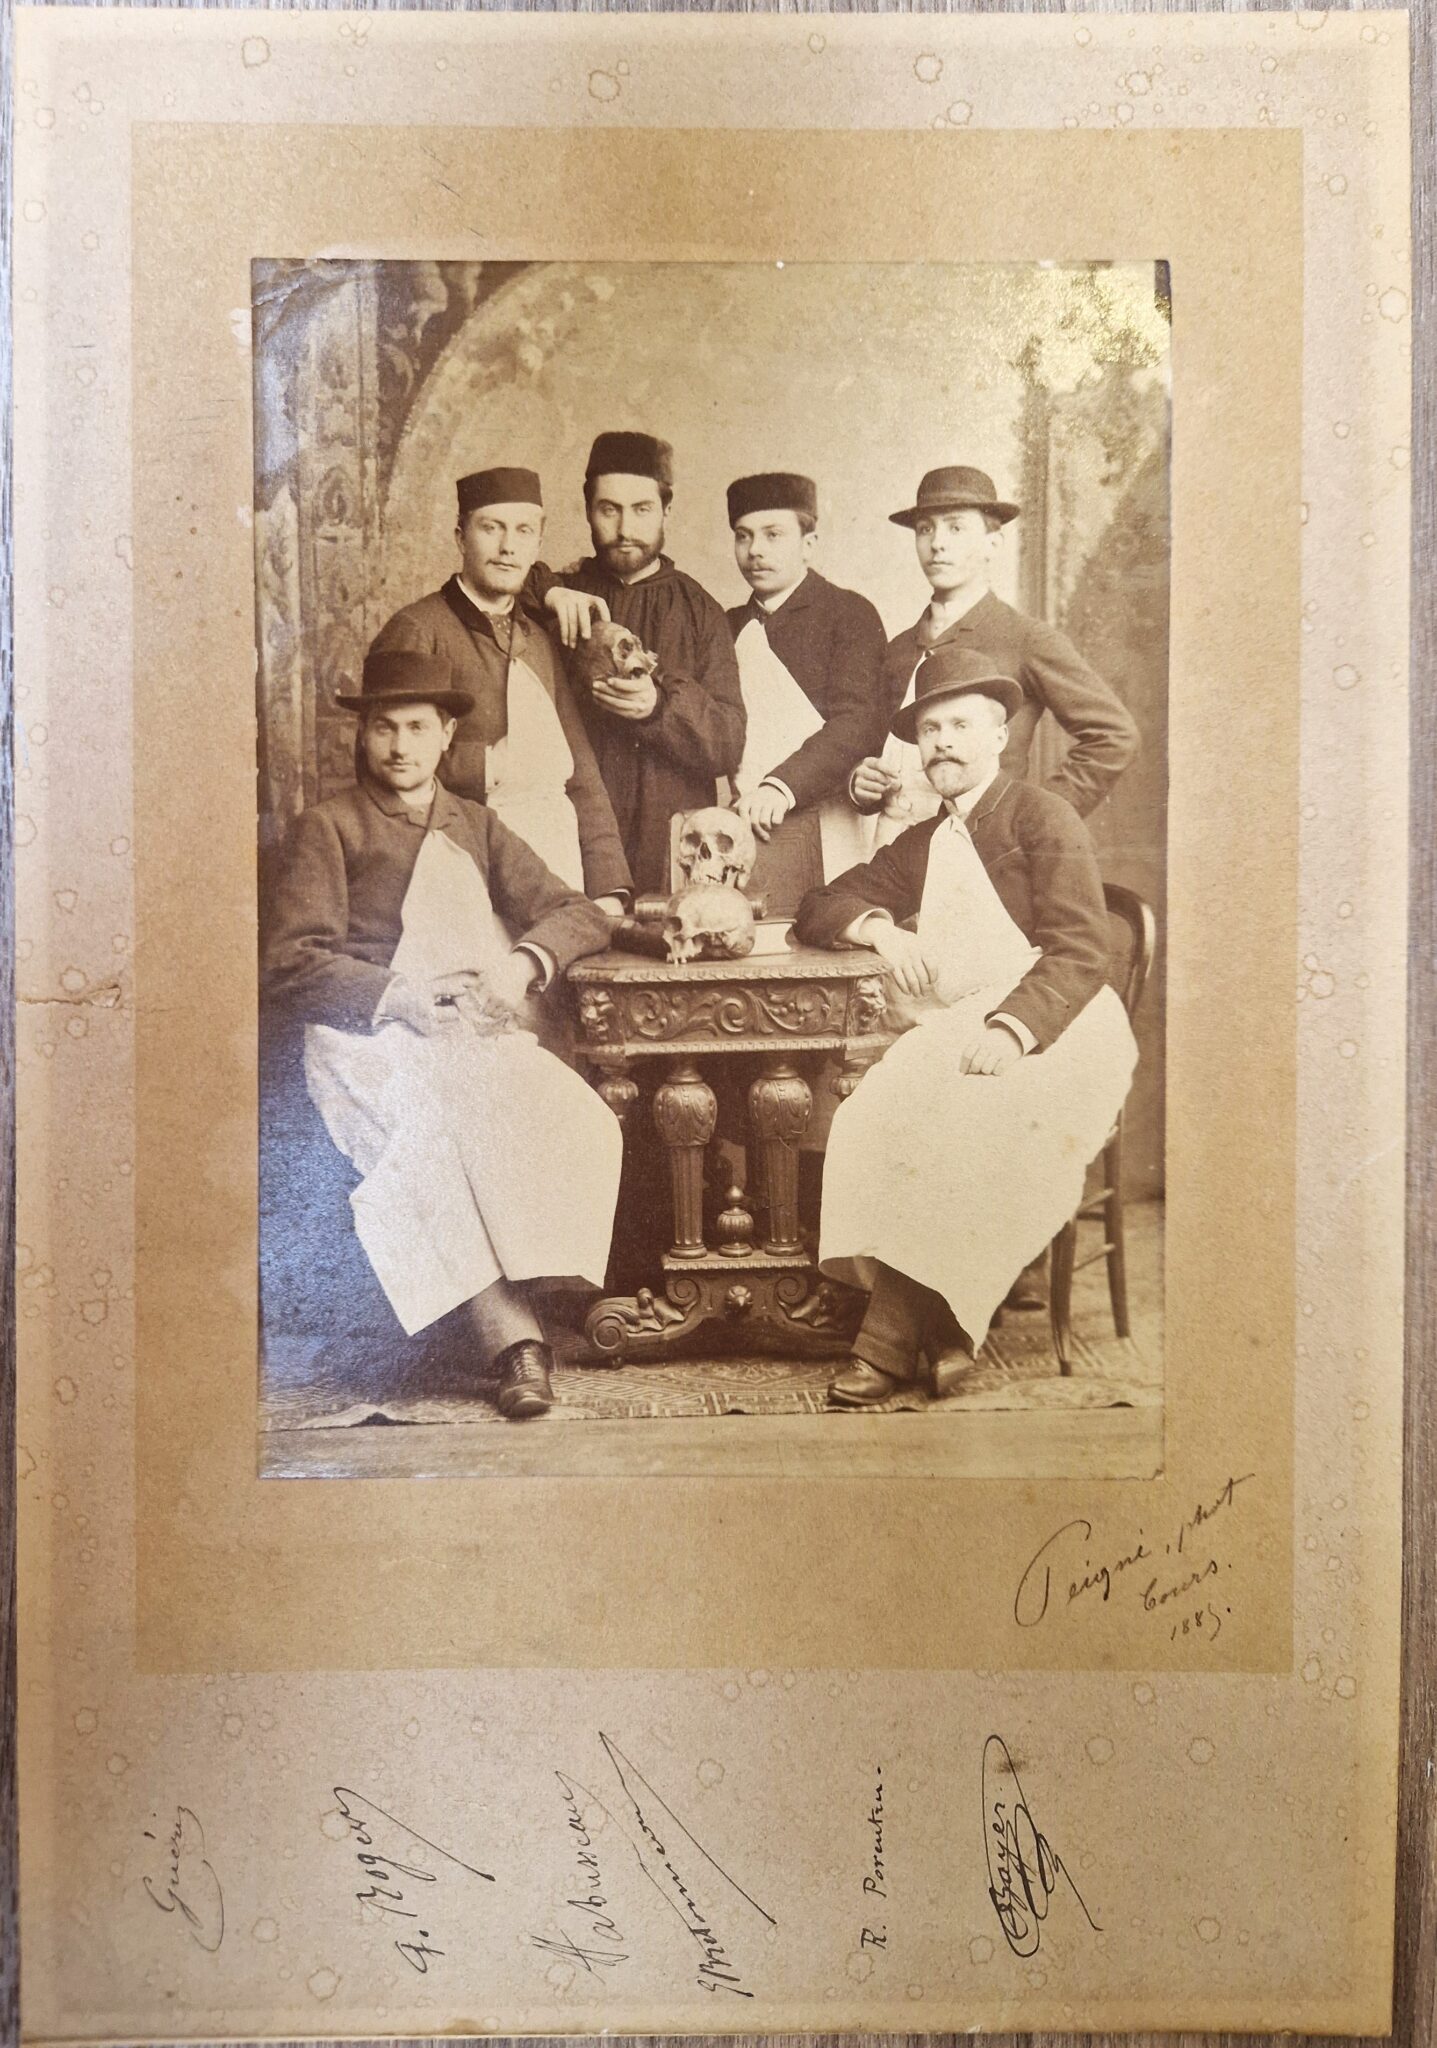 Rare original albumen printF of five surgical students or professors and their anatomy skulls in 1885